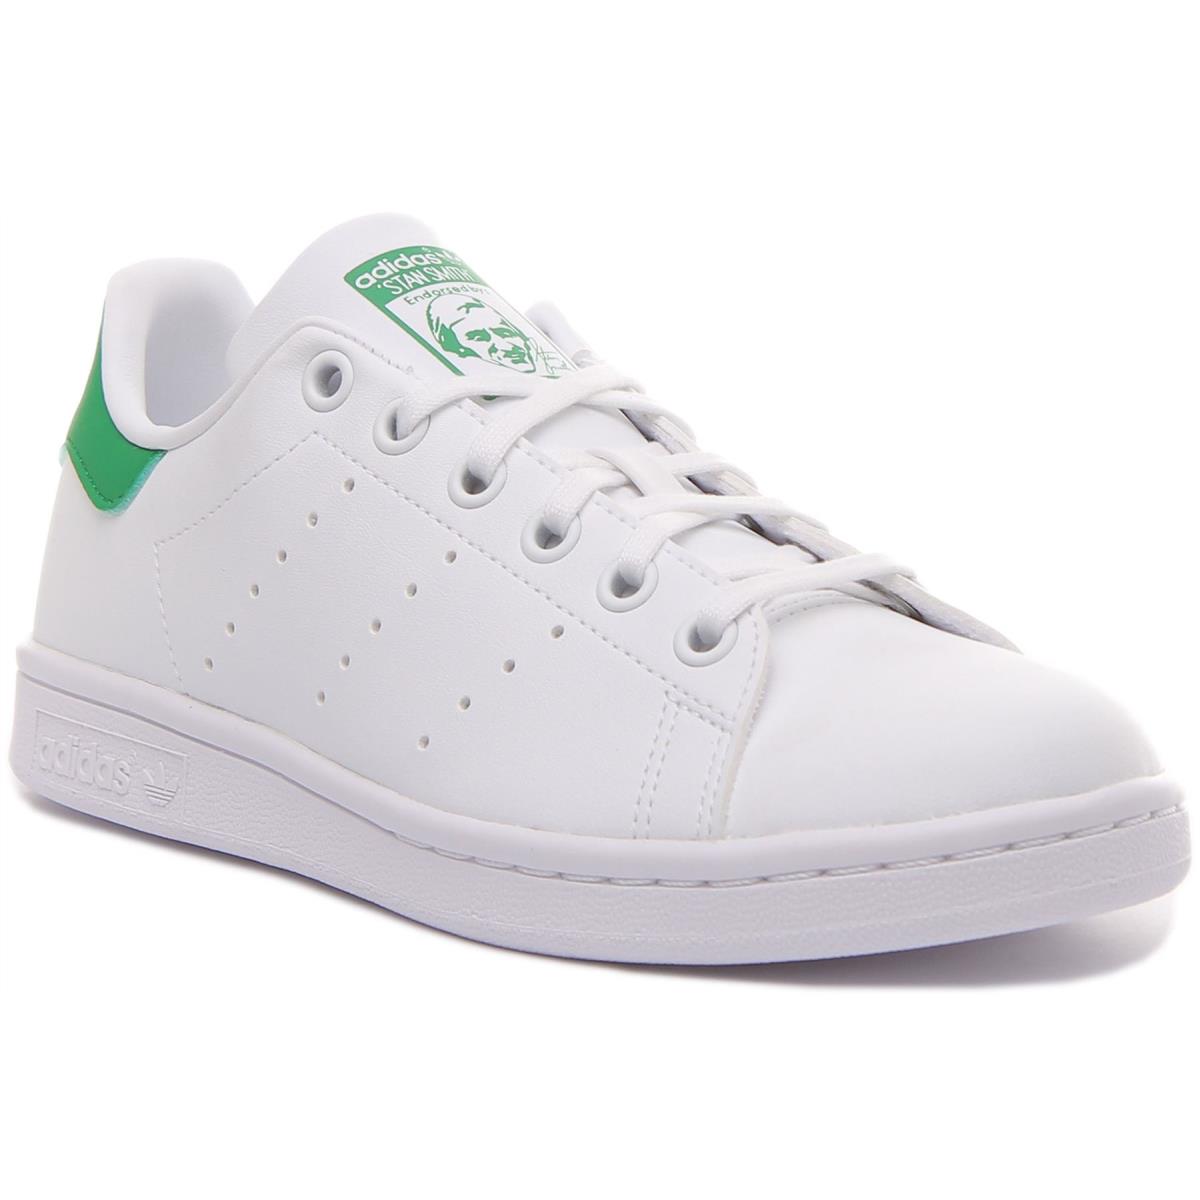 Adidas Junior Stan Smith Classic Tennis Shoes In White Green Size US 3 - 6 WHITE GREEN